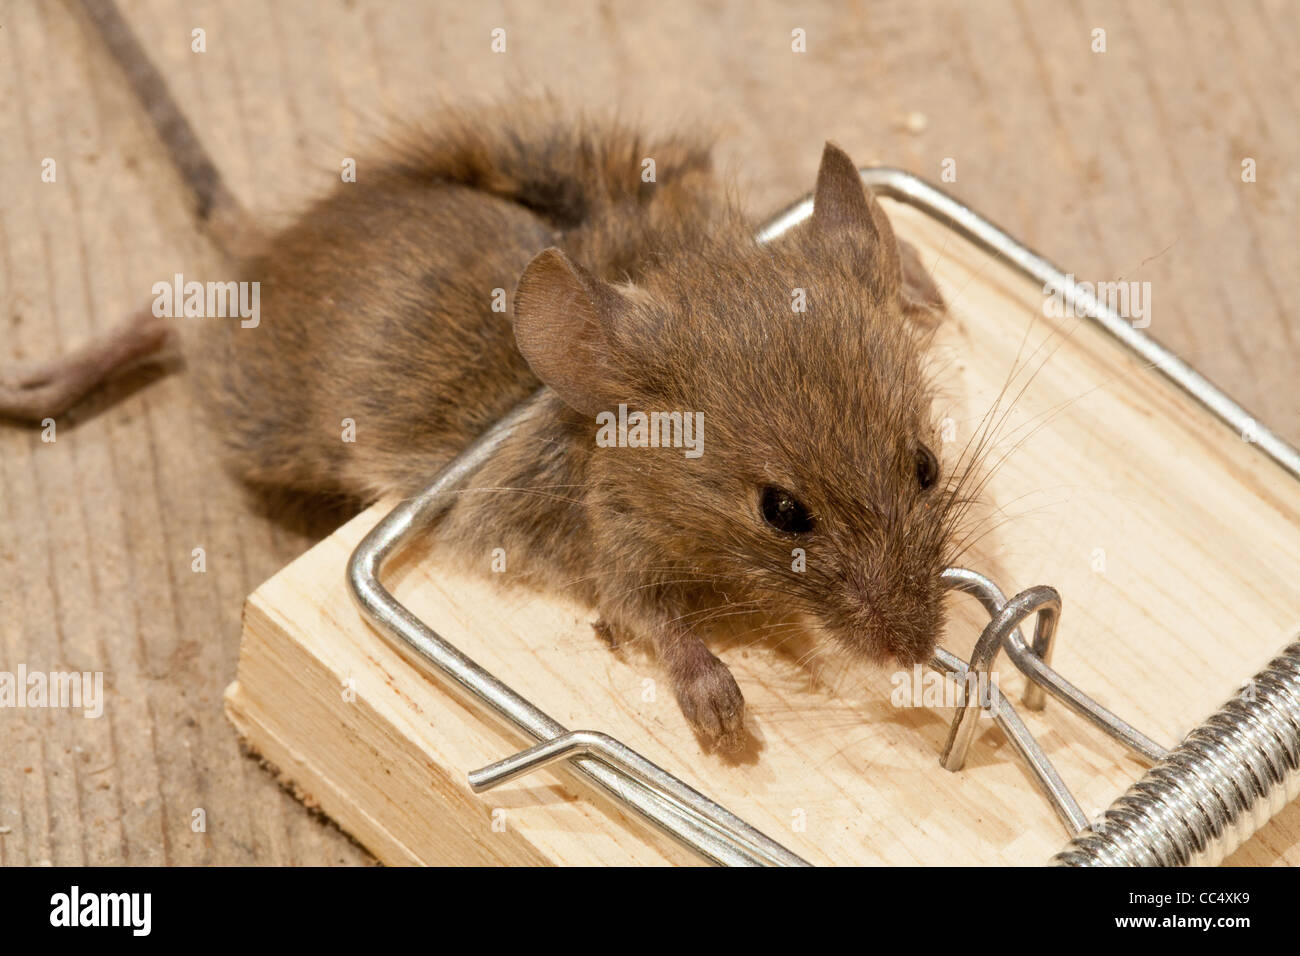 Dead mouse in mouse trap on floorboards Stock Photo